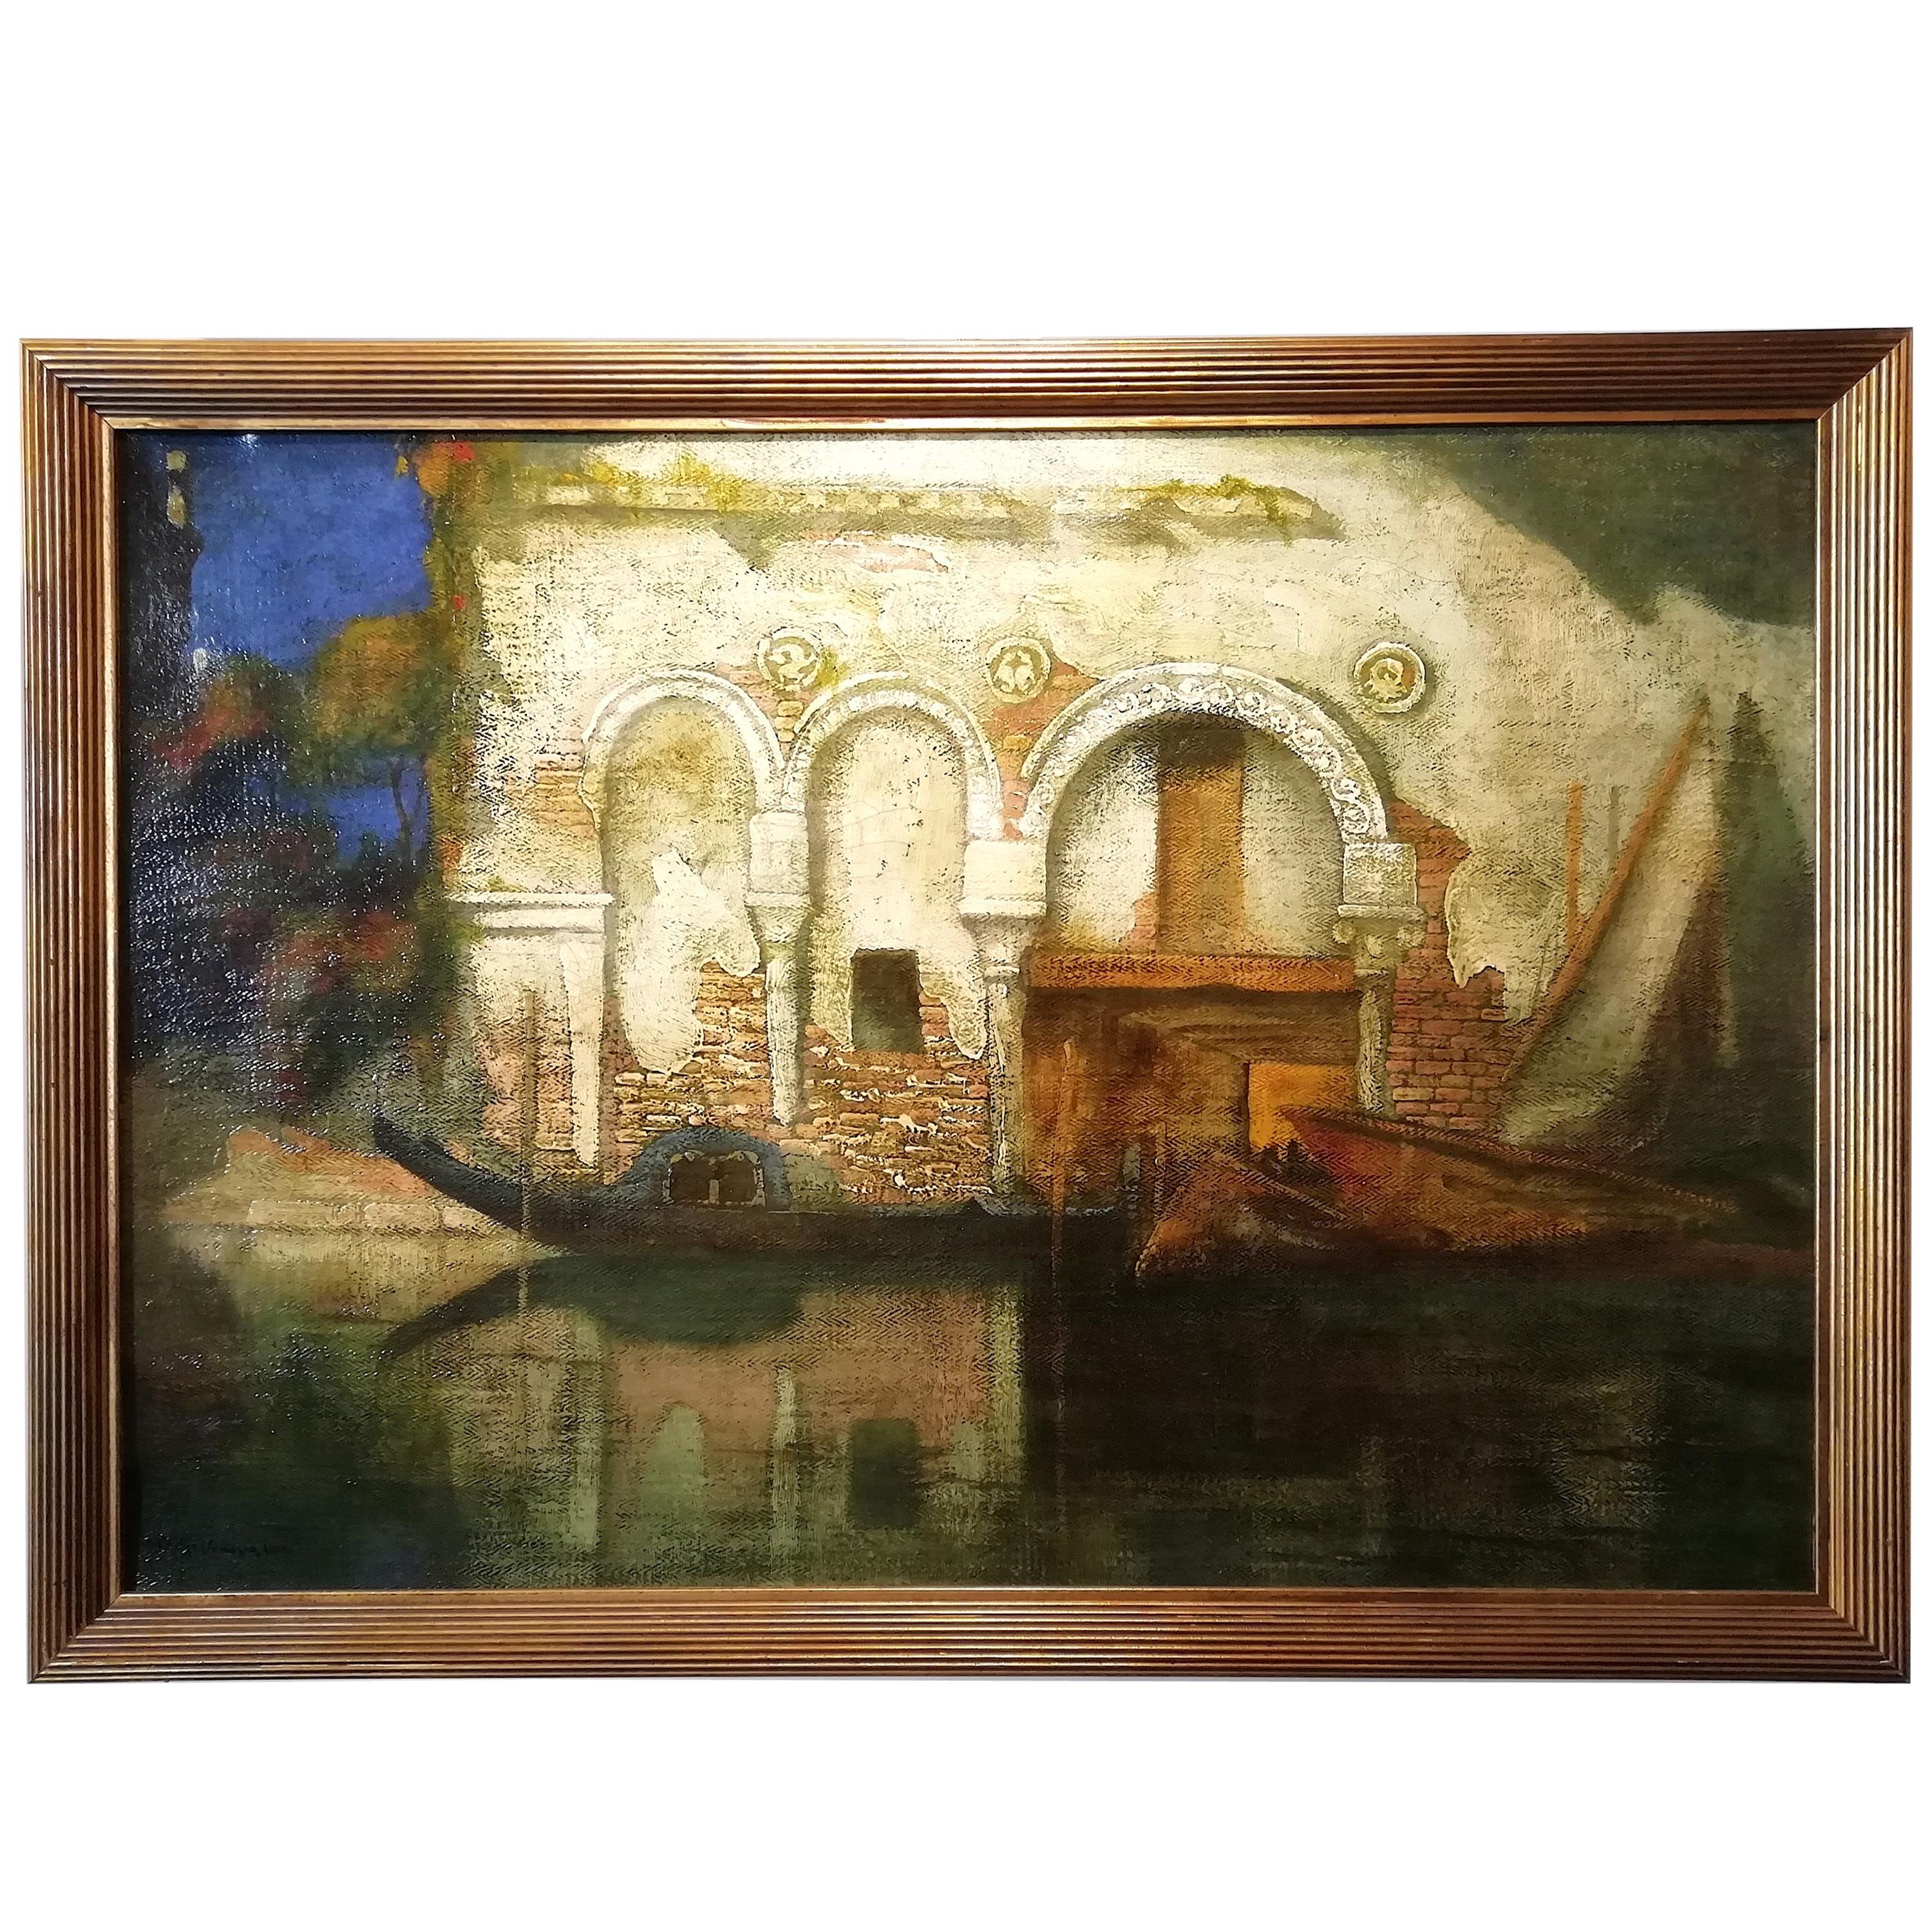 Cà da Mosto Palace in Venice, Favai 20th Century Oil on Canvas Italian Painting For Sale